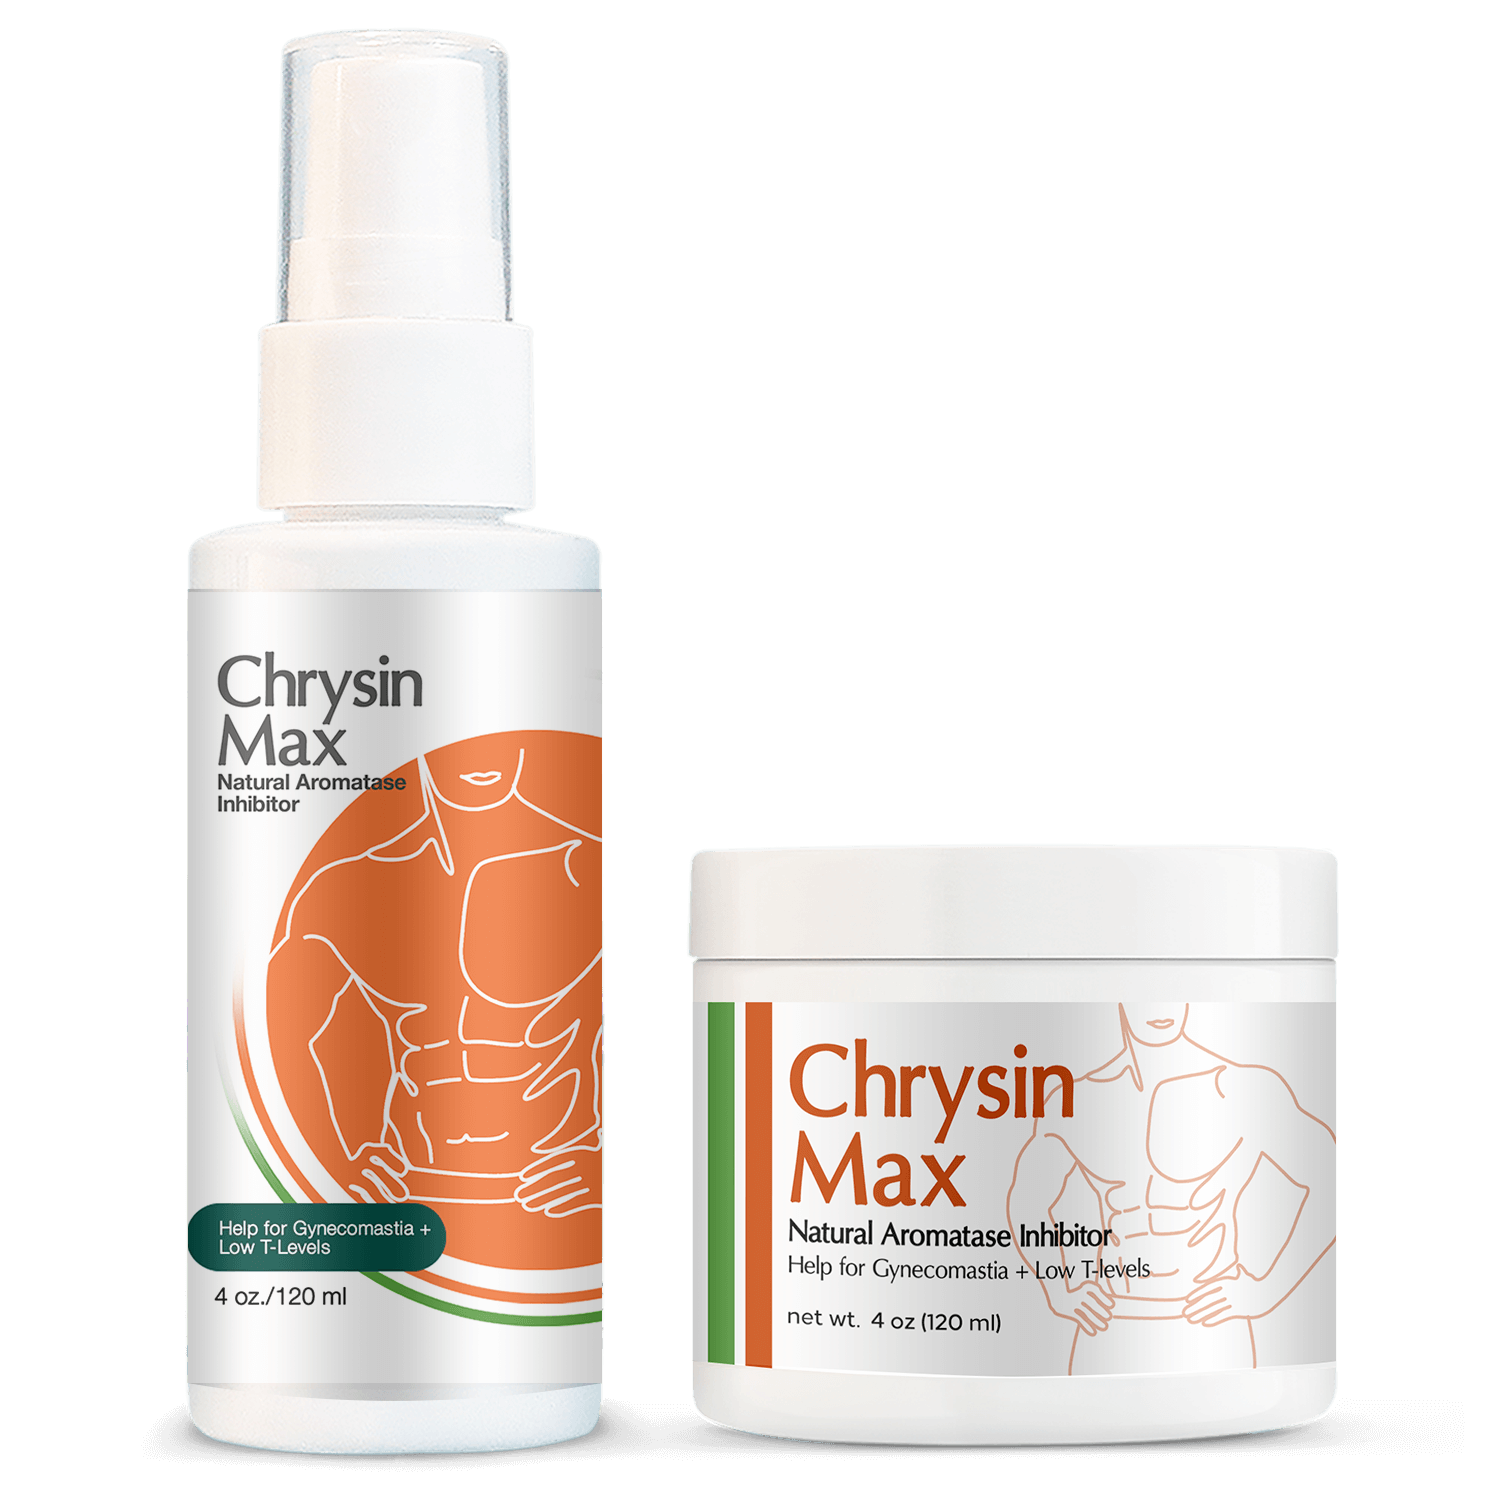 Chrysin Max The Best Natural Aromatase Inhibitor Help for Gynecomastia